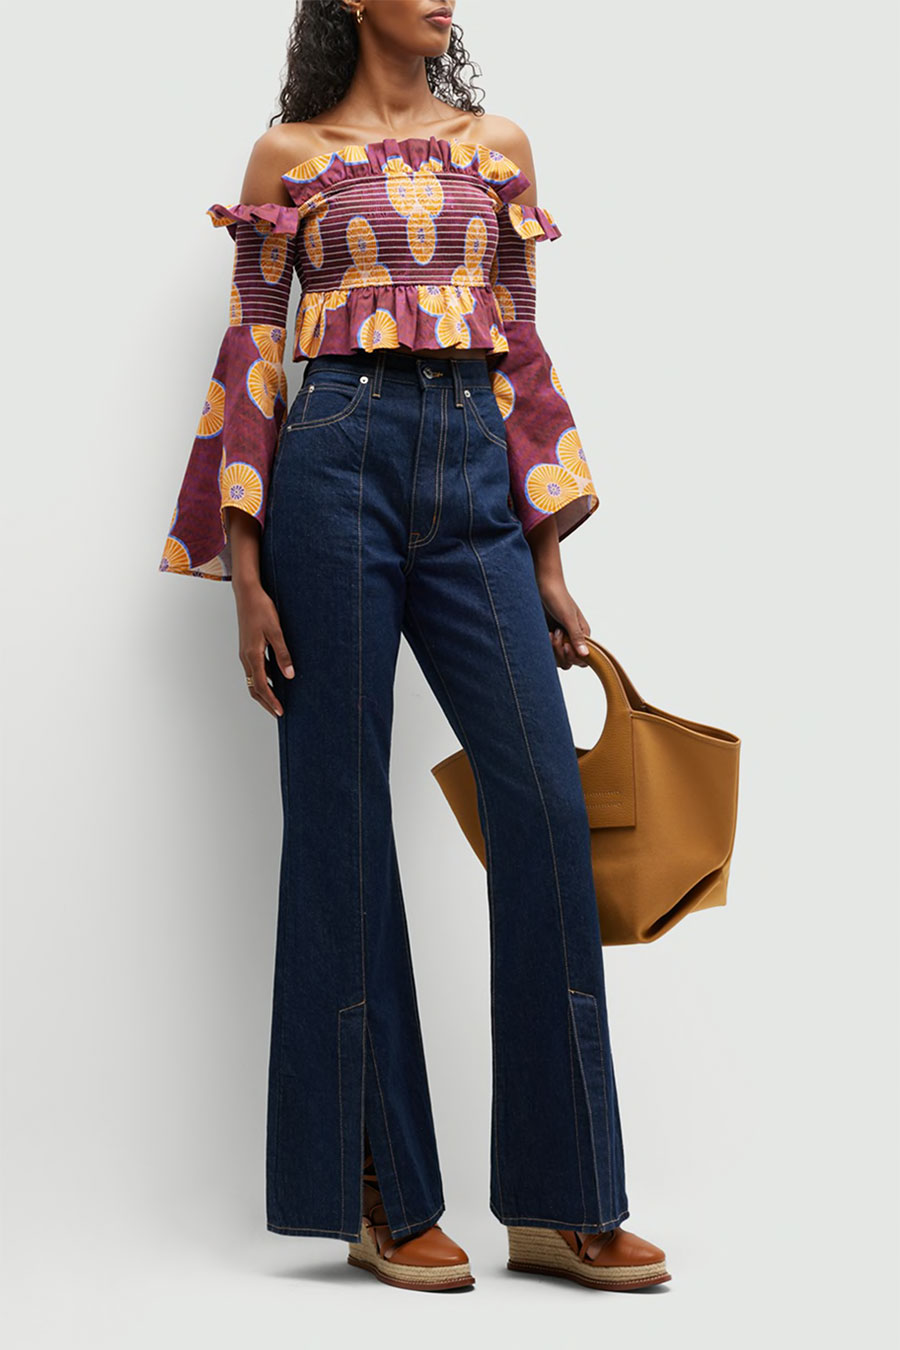 Patterned Top with Denim Bottoms